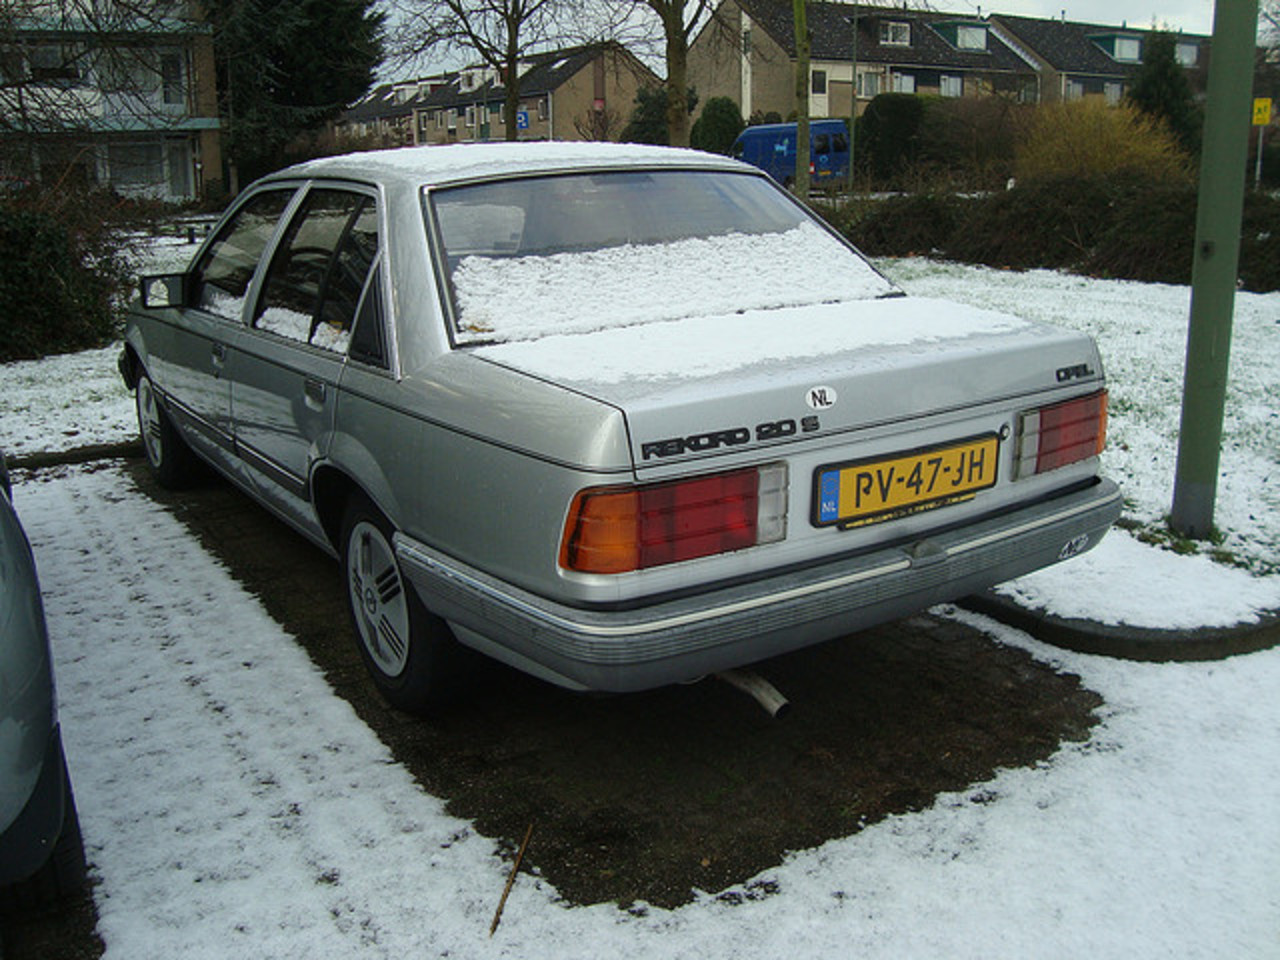 1986 Opel Record 2.0 S (automatic) | Flickr - Photo Sharing!